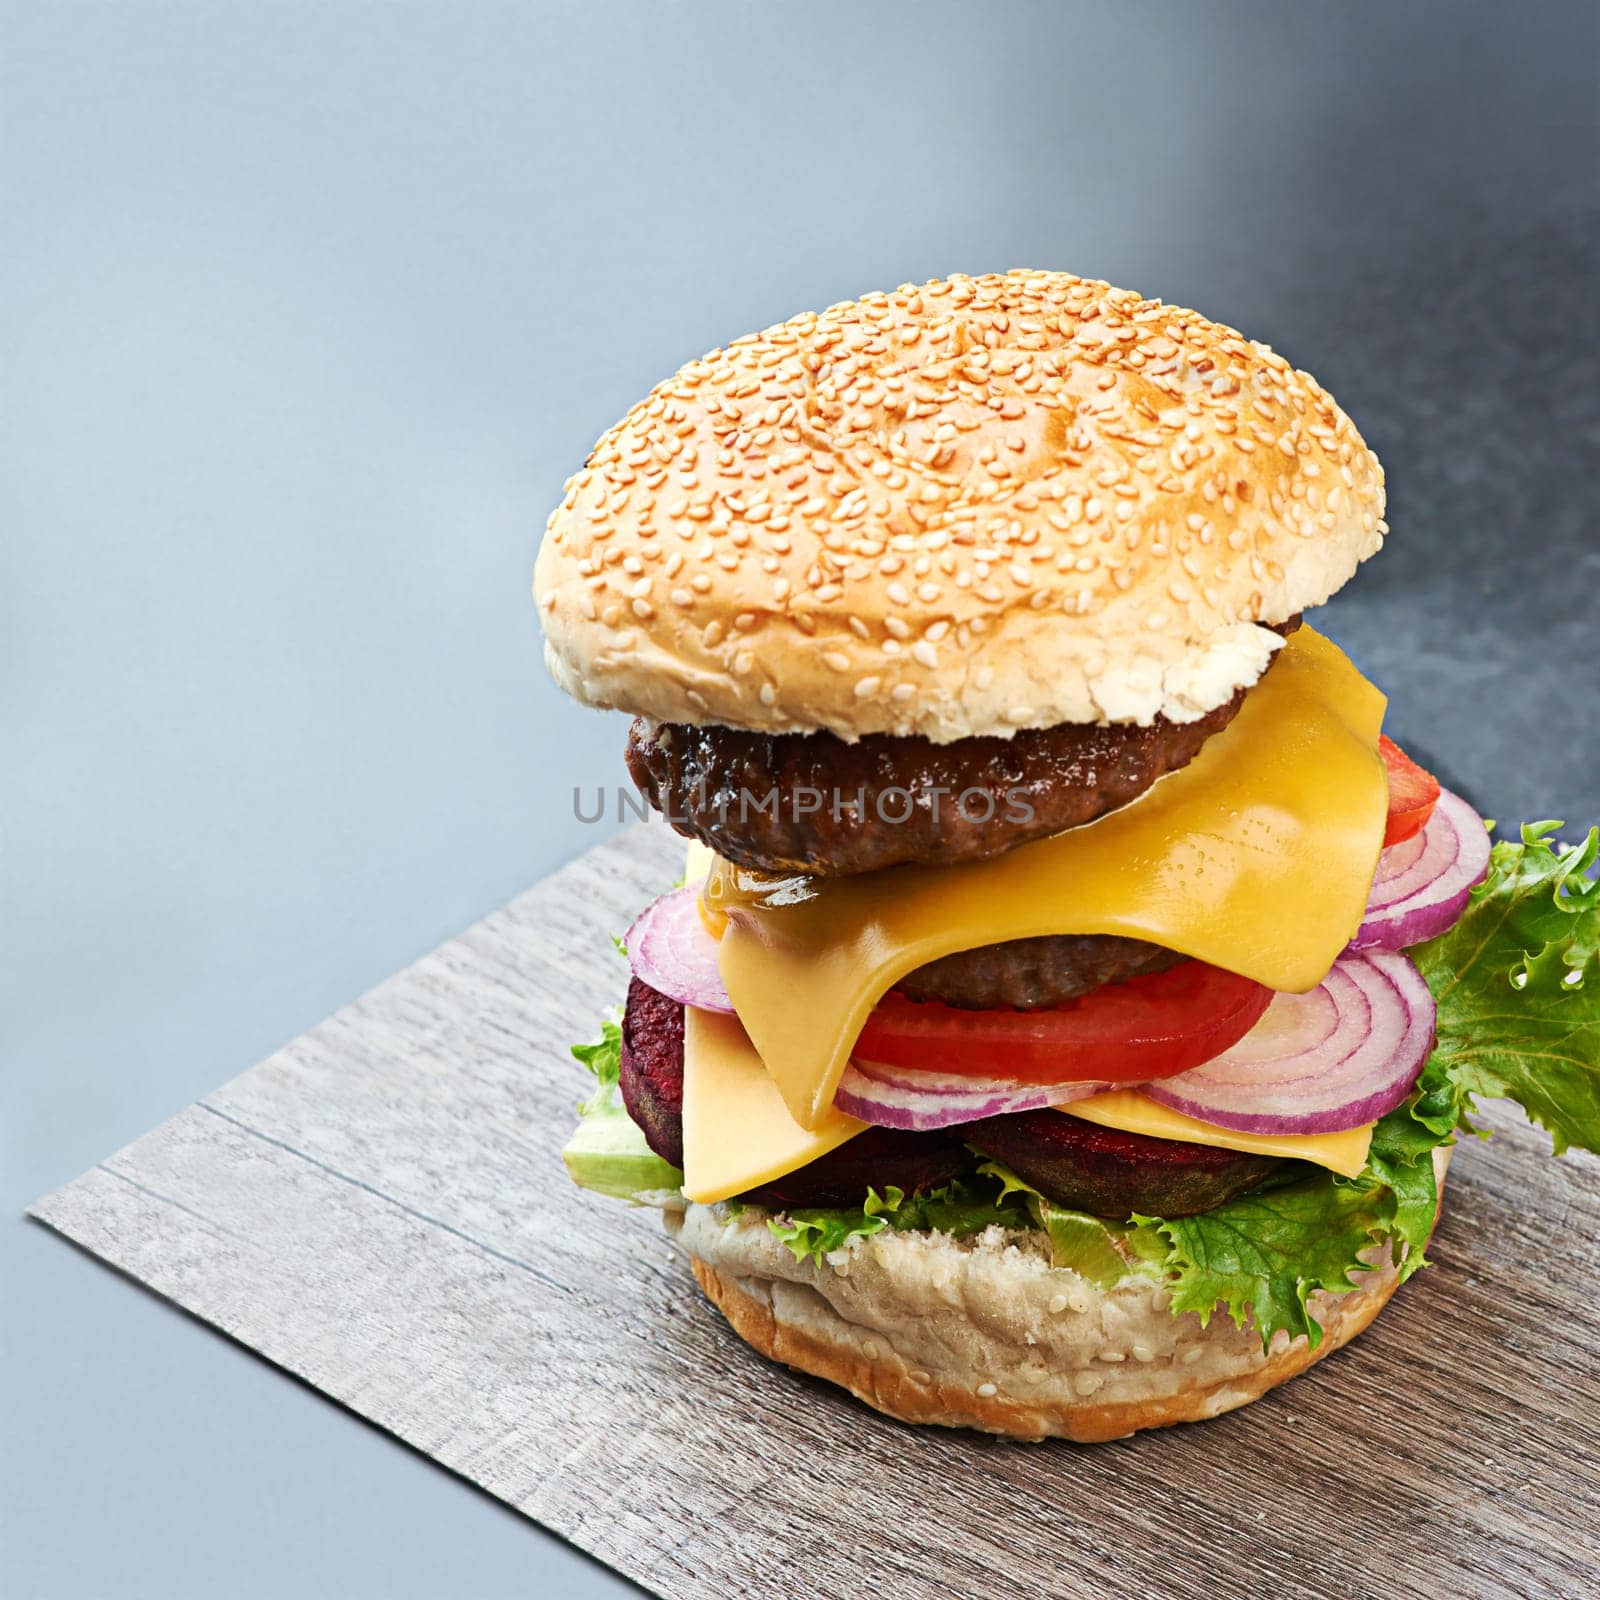 Beef, burger and cheese on menu in restaurant with lettuce, tomato and onion on sesame bun in kitchen. Bbq, hamburger and fast food with meat and salad from fine dining diner for dinner or lunch.